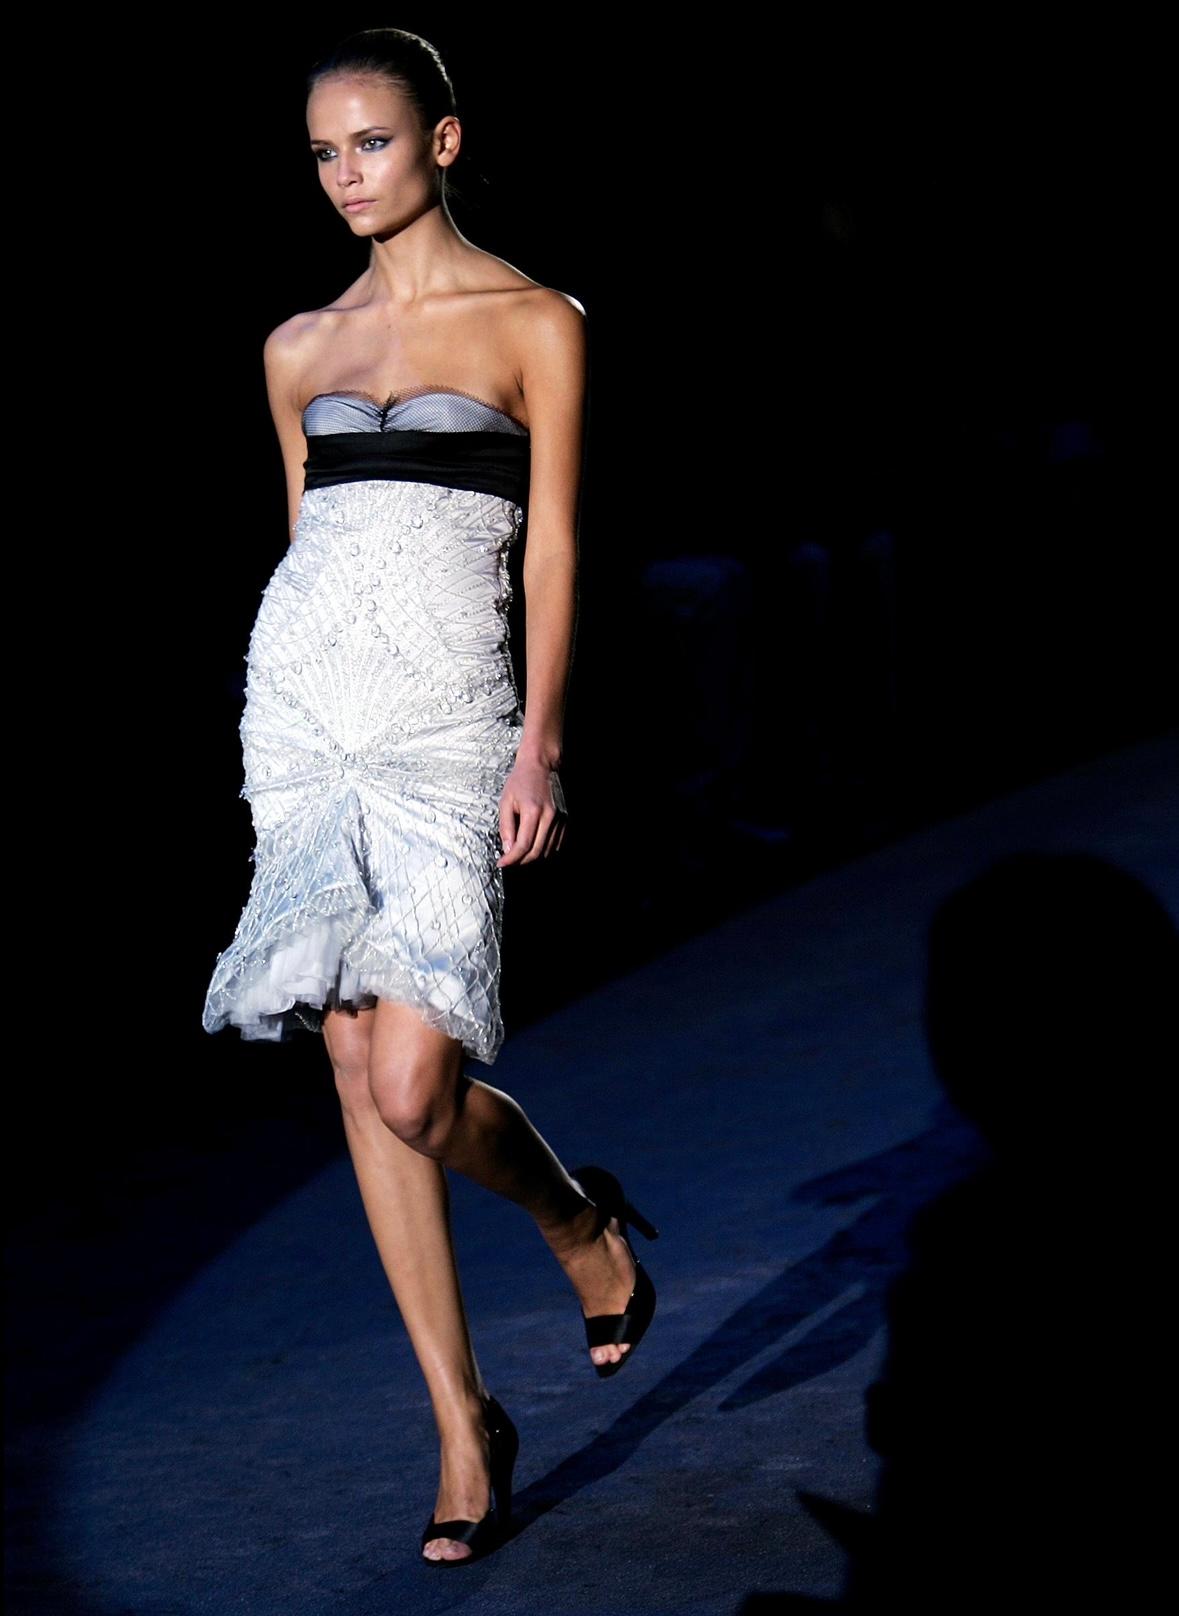 Presenting an incredible silver and black embroidered strapless Gucci dress, designed by Alessandra Facchinetti. From the Fall/Winter 2005 collection, this dress debuted as part of look 38 modeled by Natasha Poly and was also highlighted in the